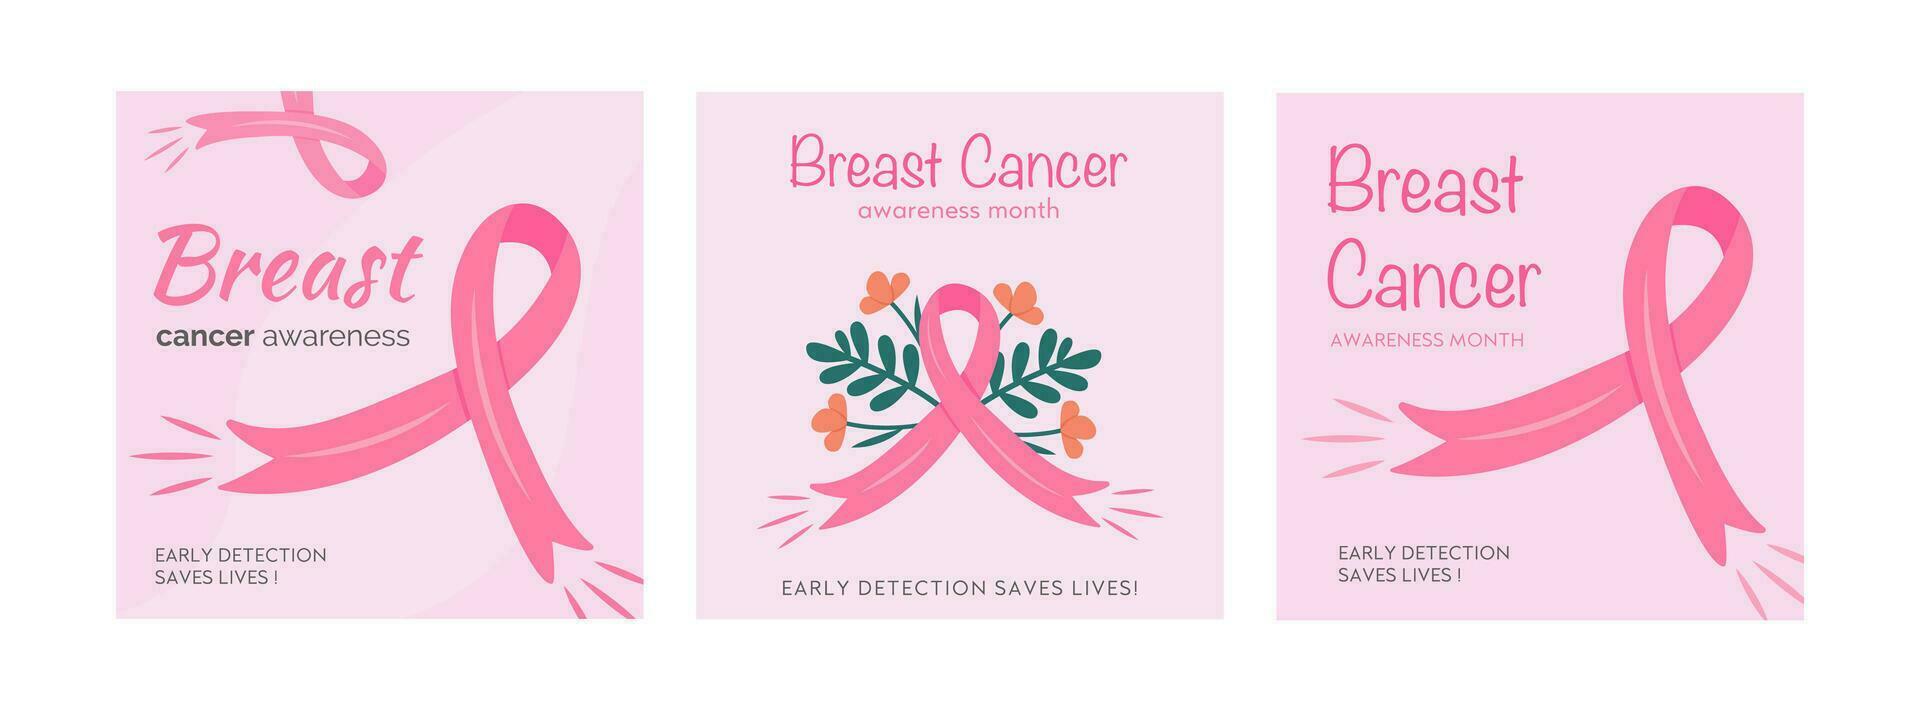 Set of vector cards for Breast Cancer Awareness Month. Collection of square banner templates for mammary cancer campaign with pink cartoon ribbons and floral decoration. Flat style Illustration.